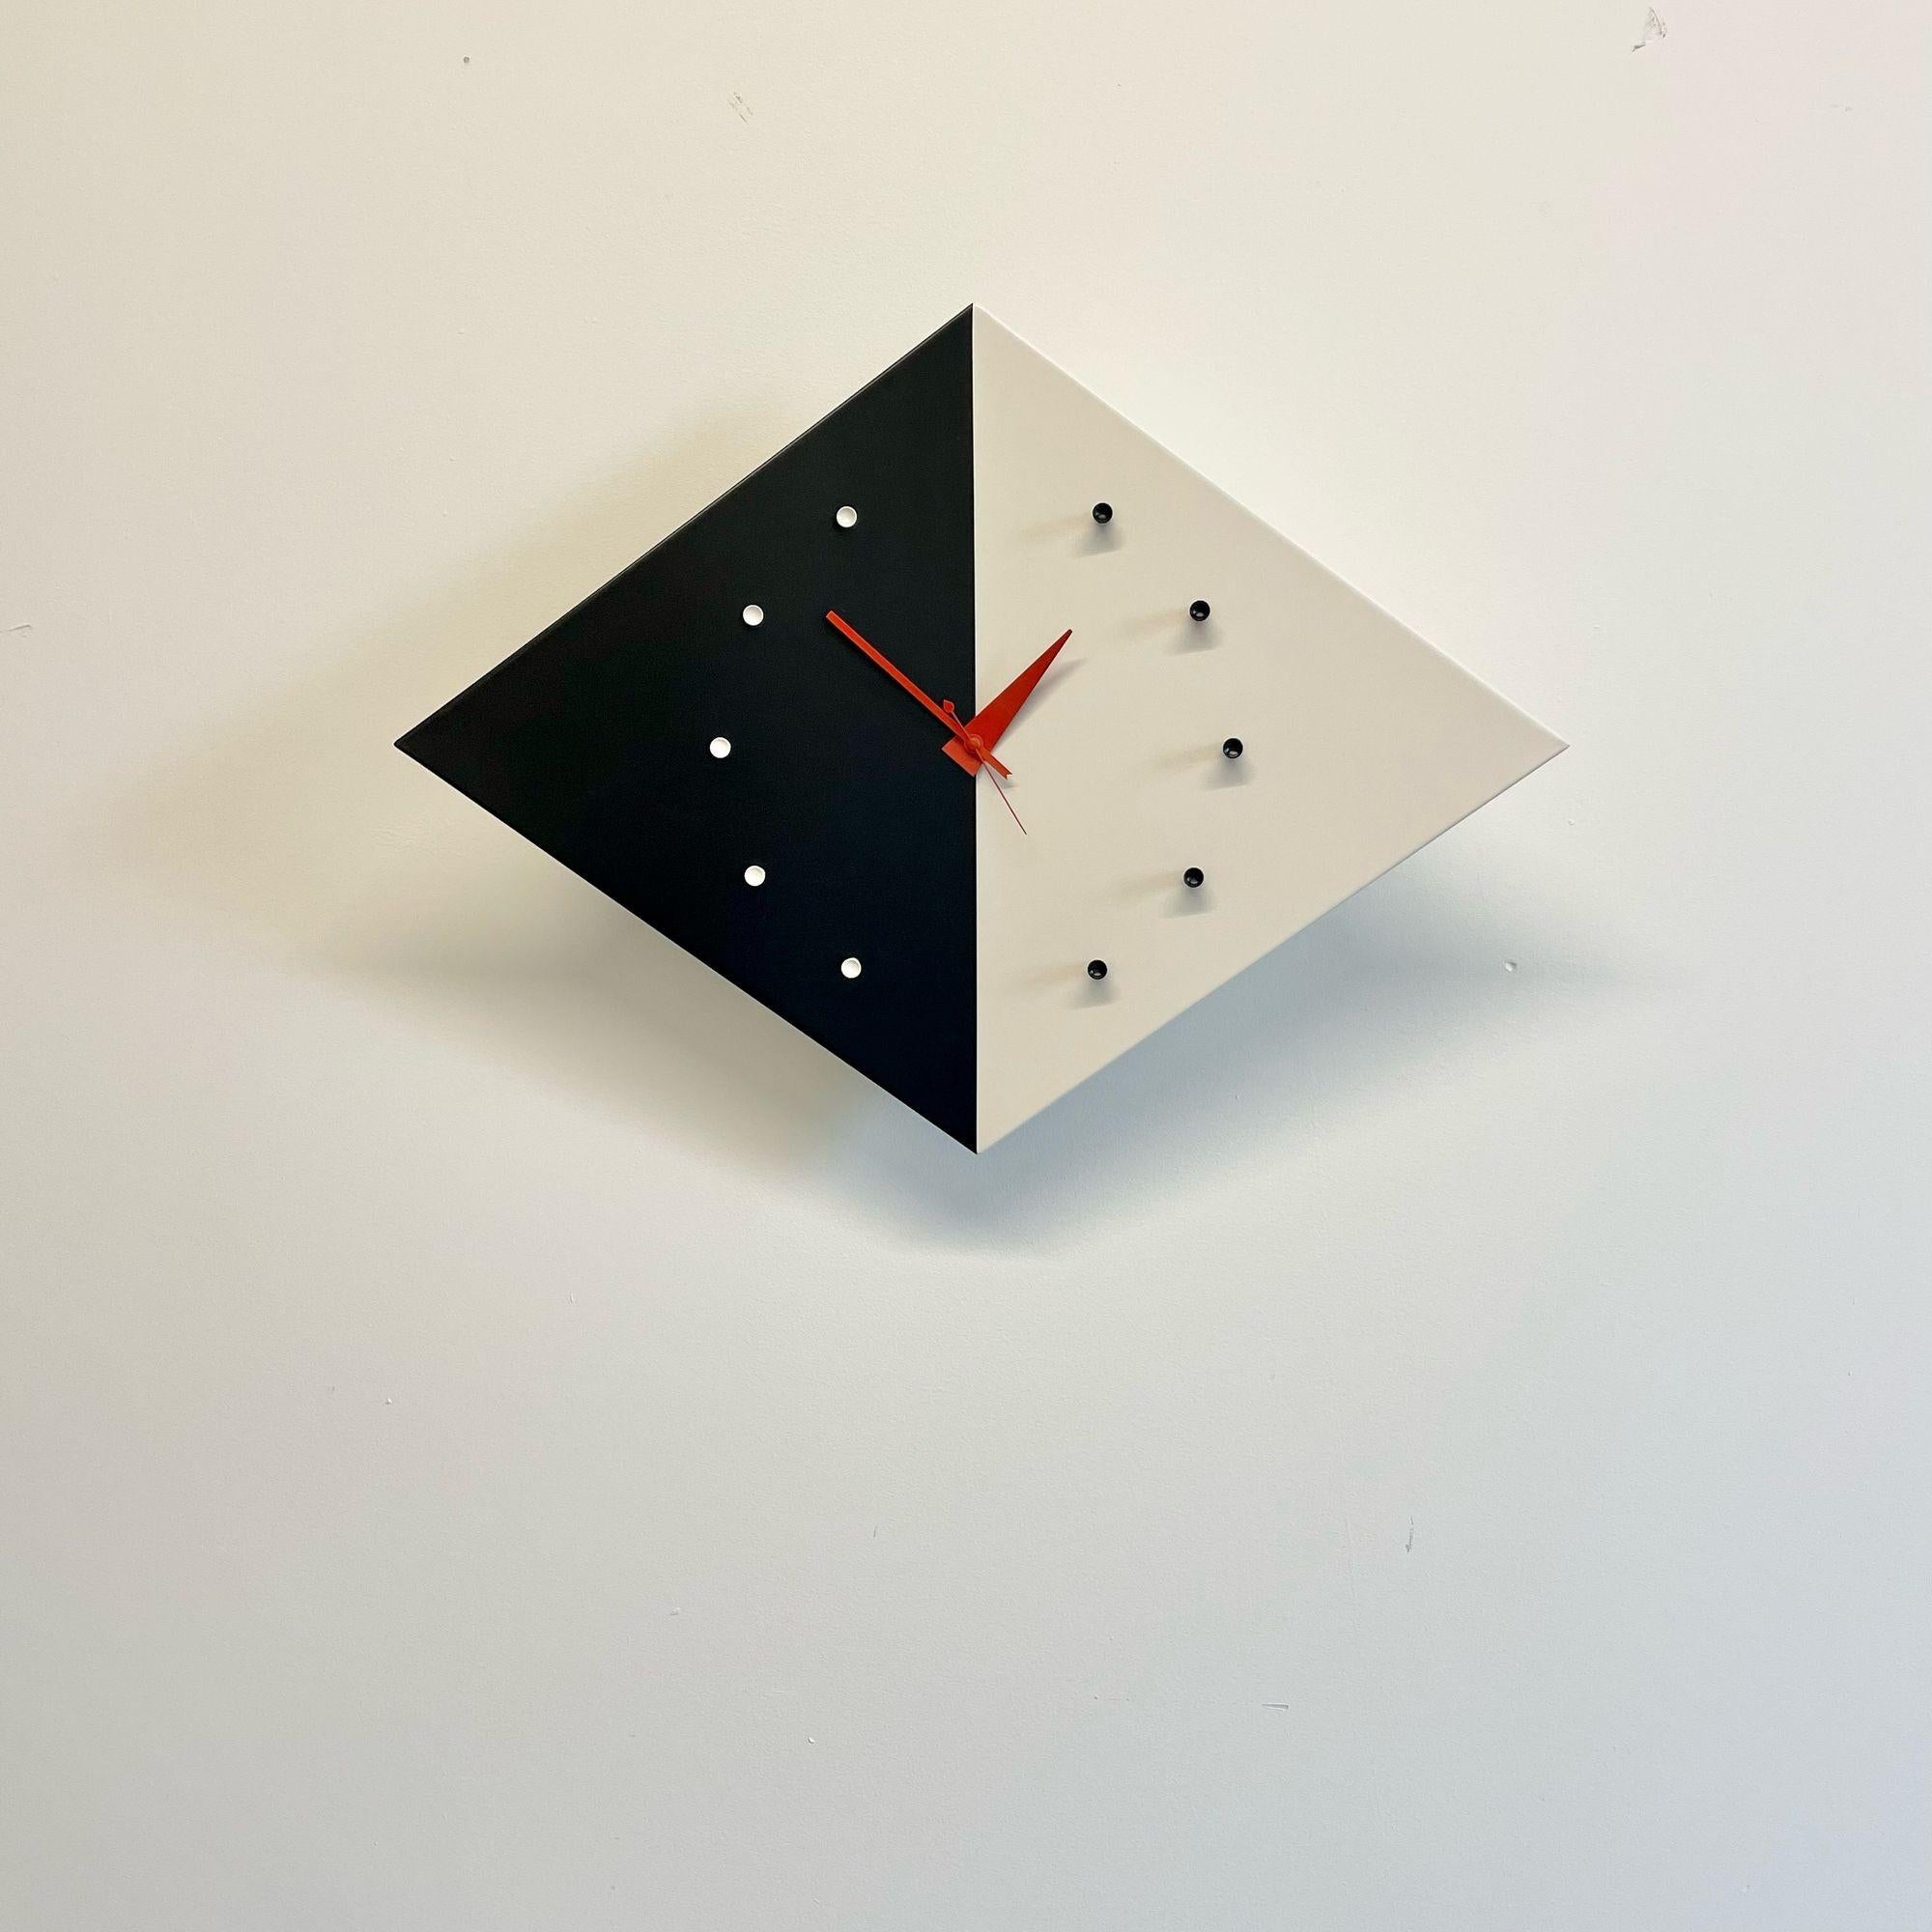 20th Century Mid-Century Modern Kite Wall Clock by George Nelson, Howard Miller, Vitra Label For Sale